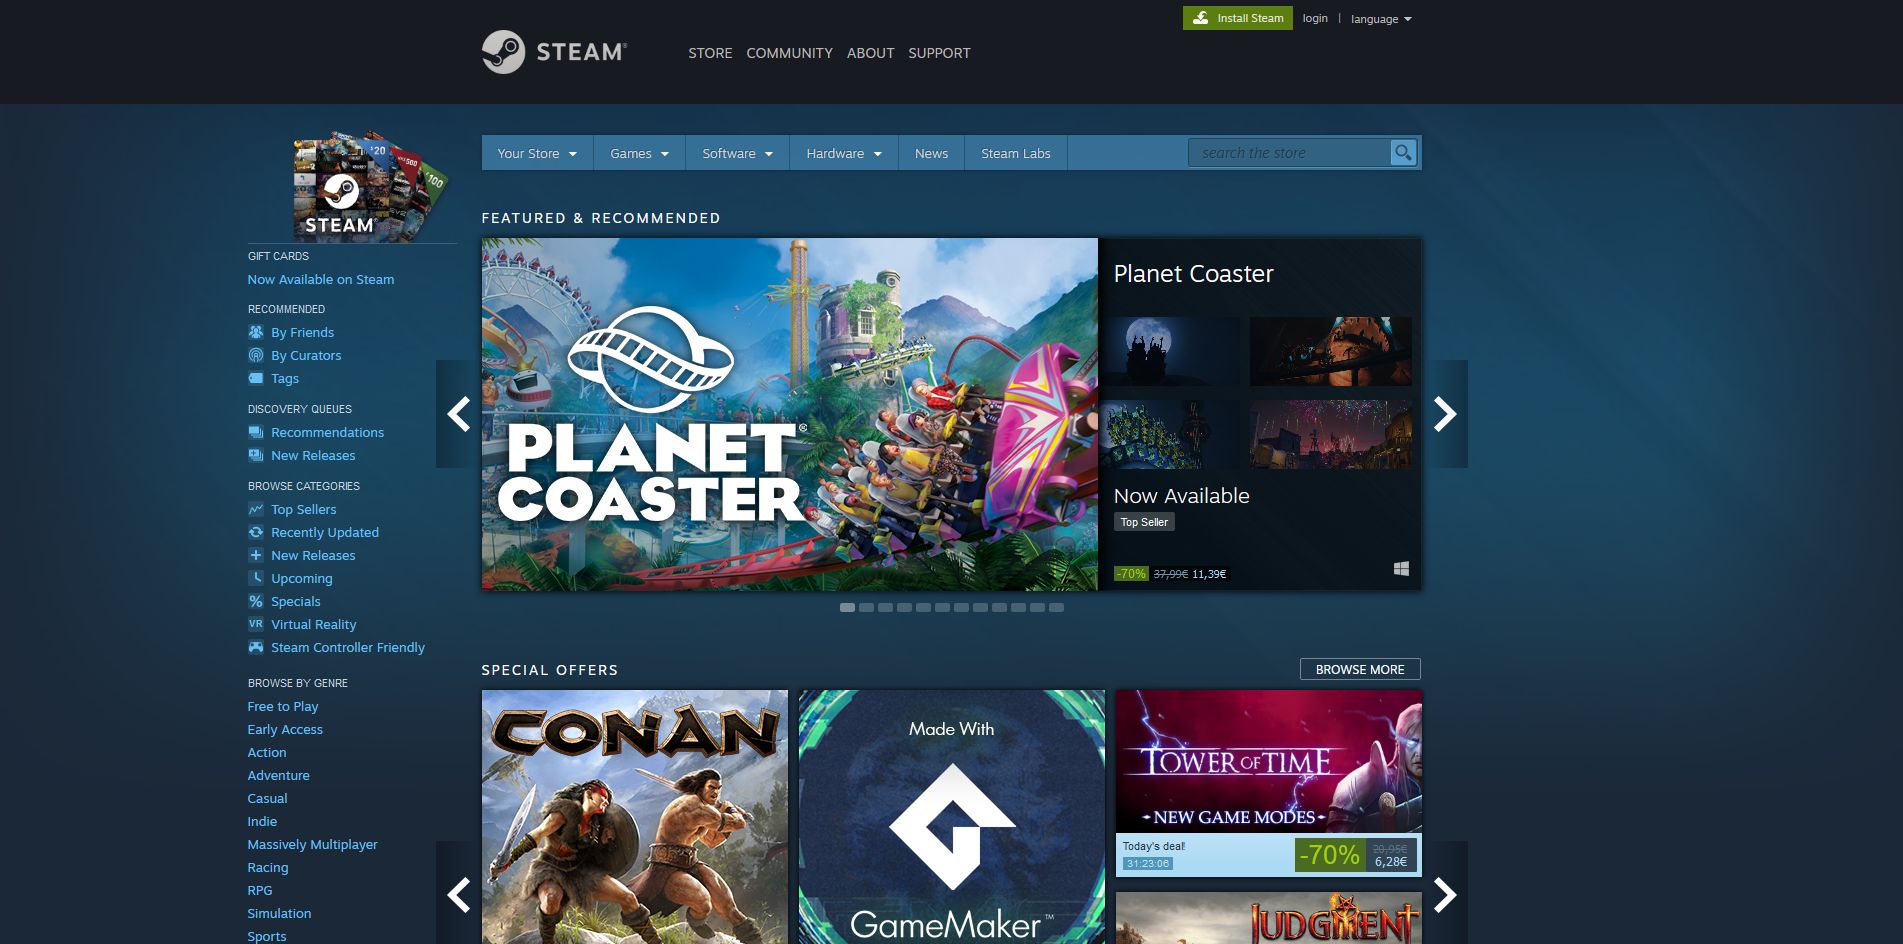 Top 10 Free PC Games on Steam 2021 (Free to Play) 